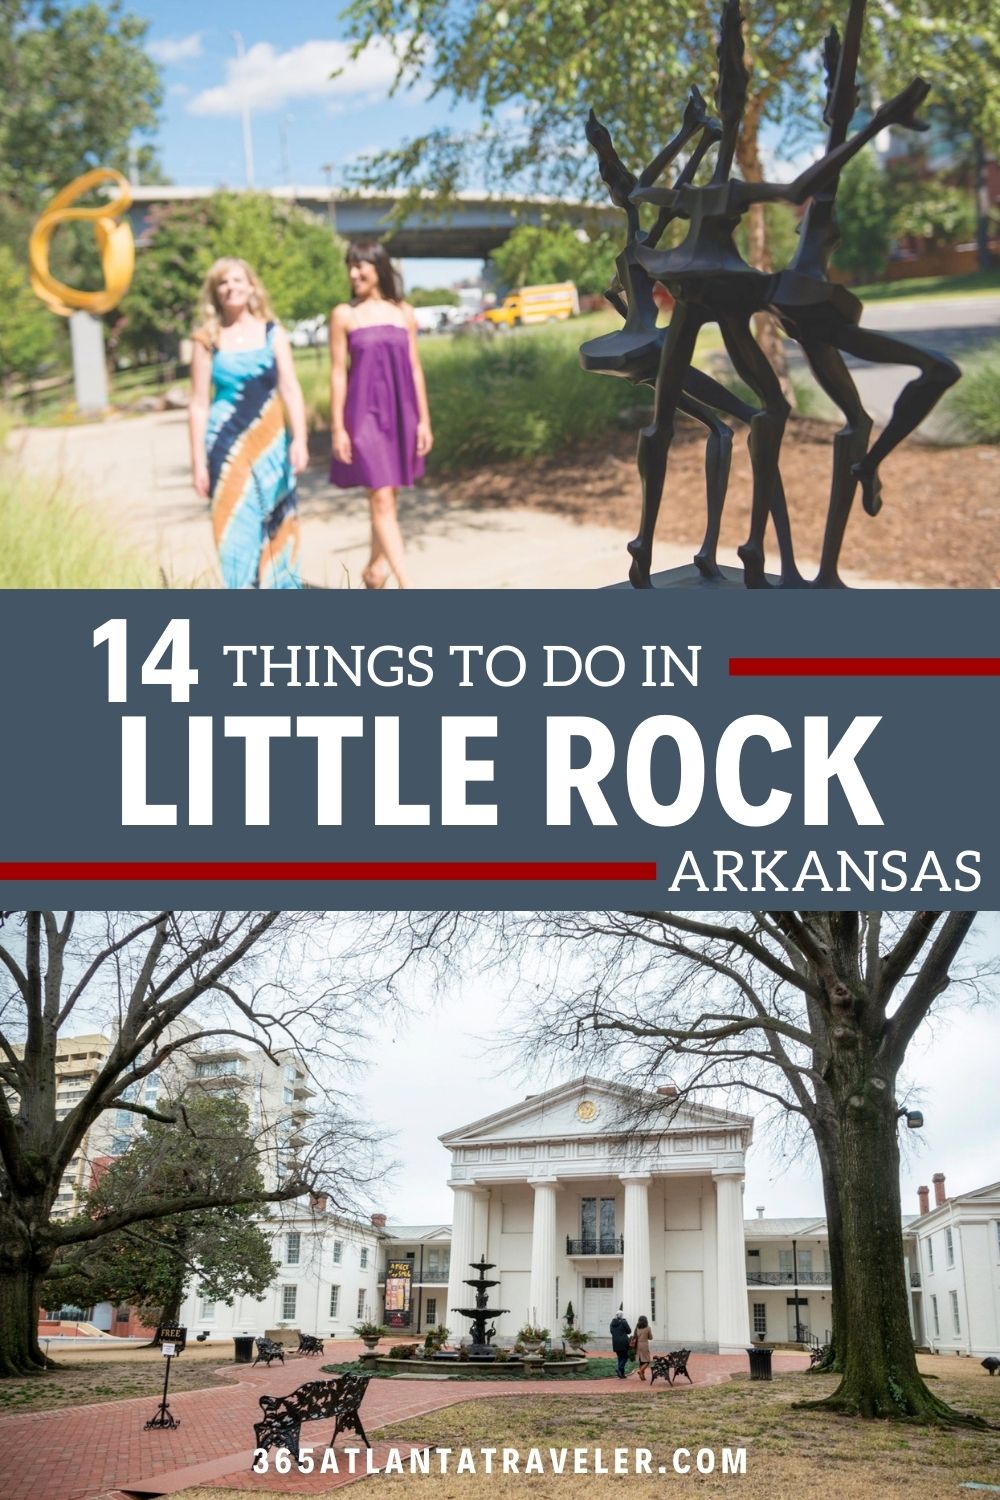 14 AMAZING THINGS TO DO IN LITTLE ROCK, ARKANSAS